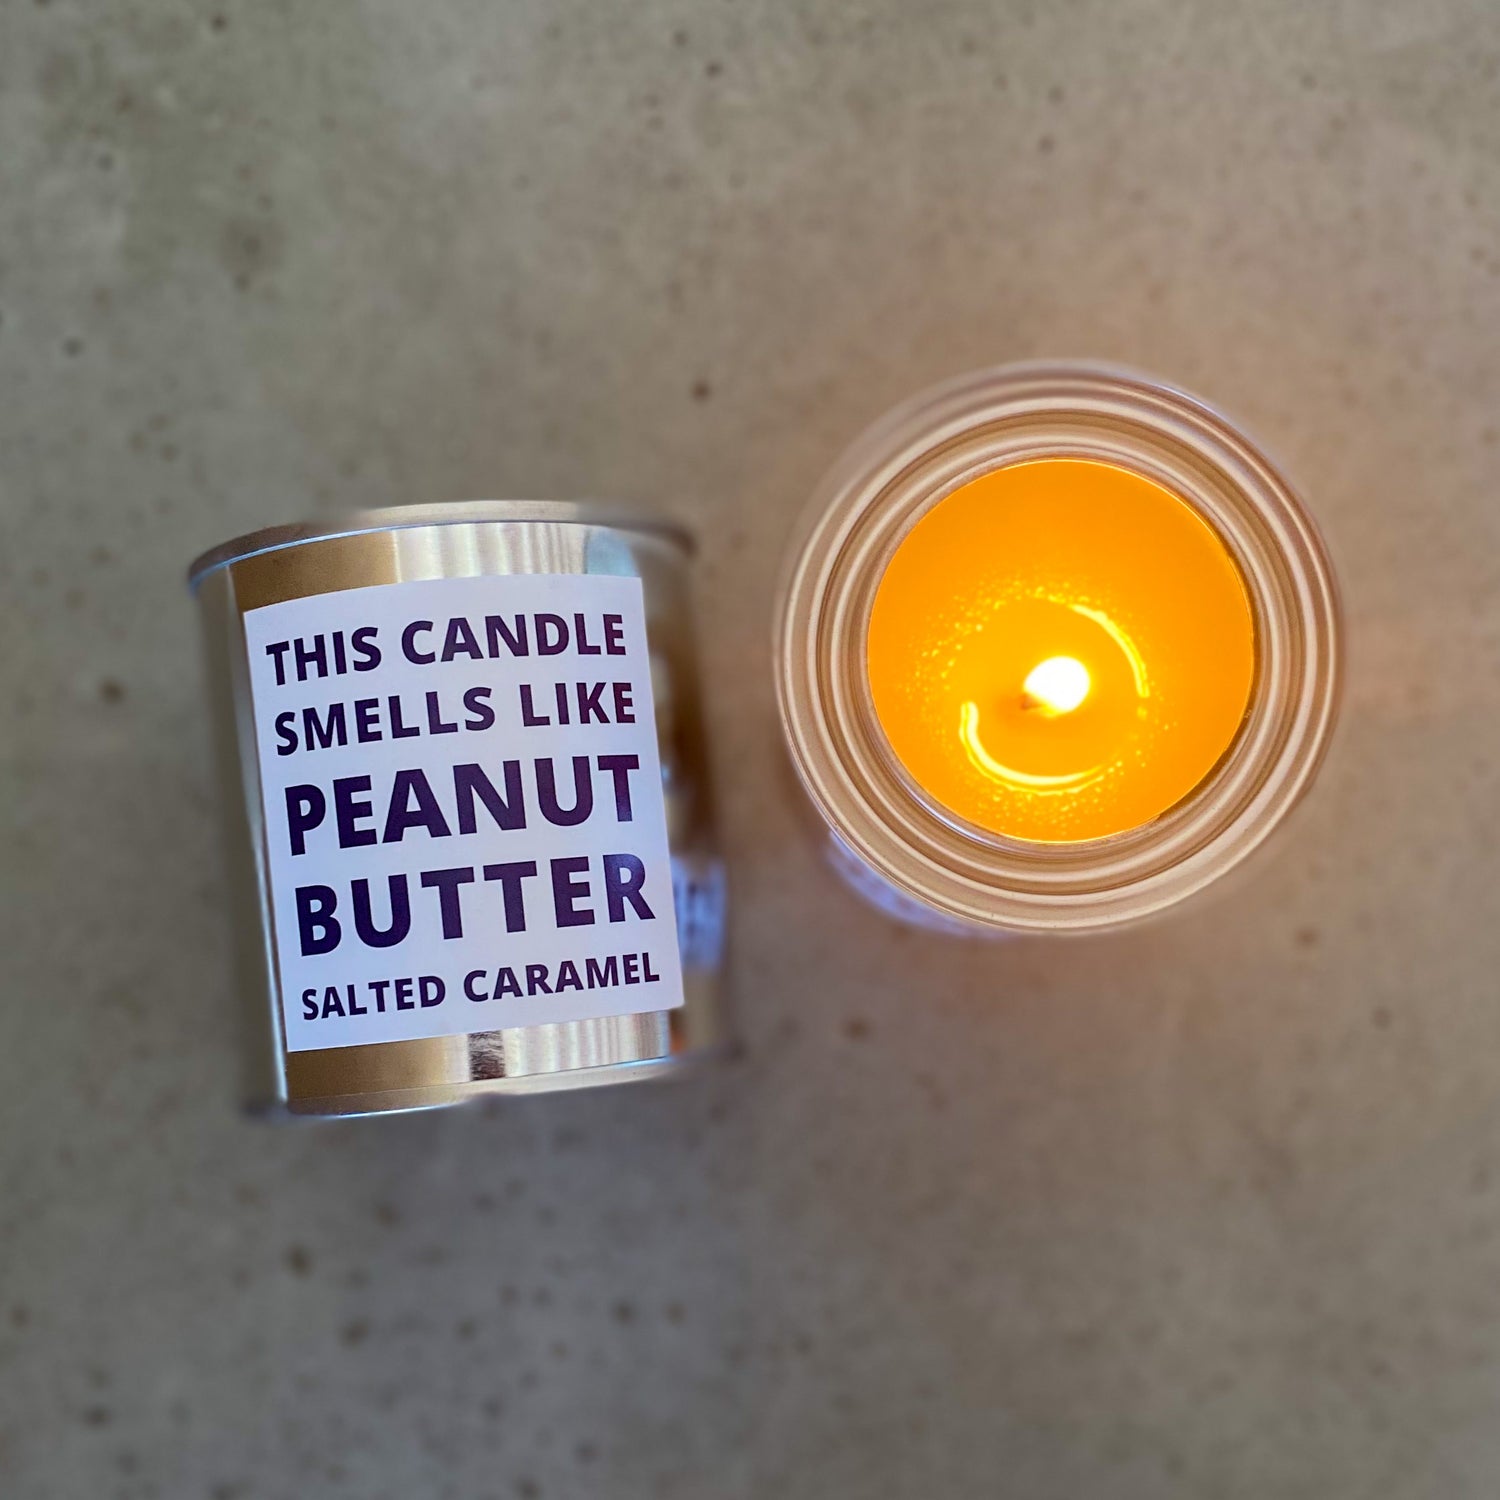 Peanut Butter scented candle